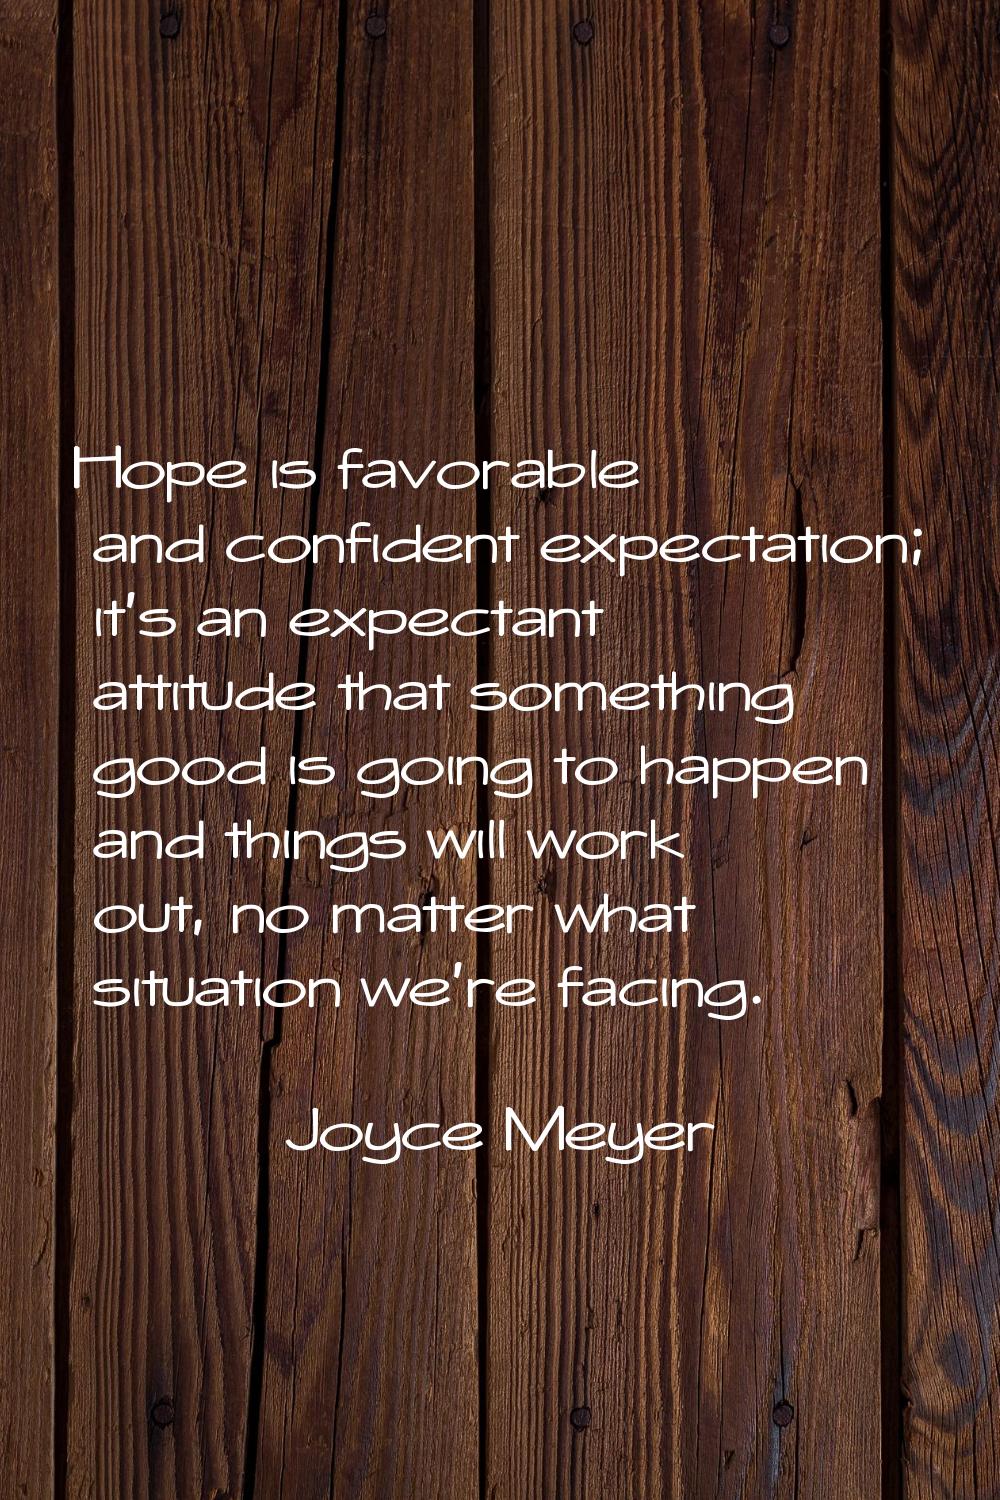 Hope is favorable and confident expectation; it's an expectant attitude that something good is goin